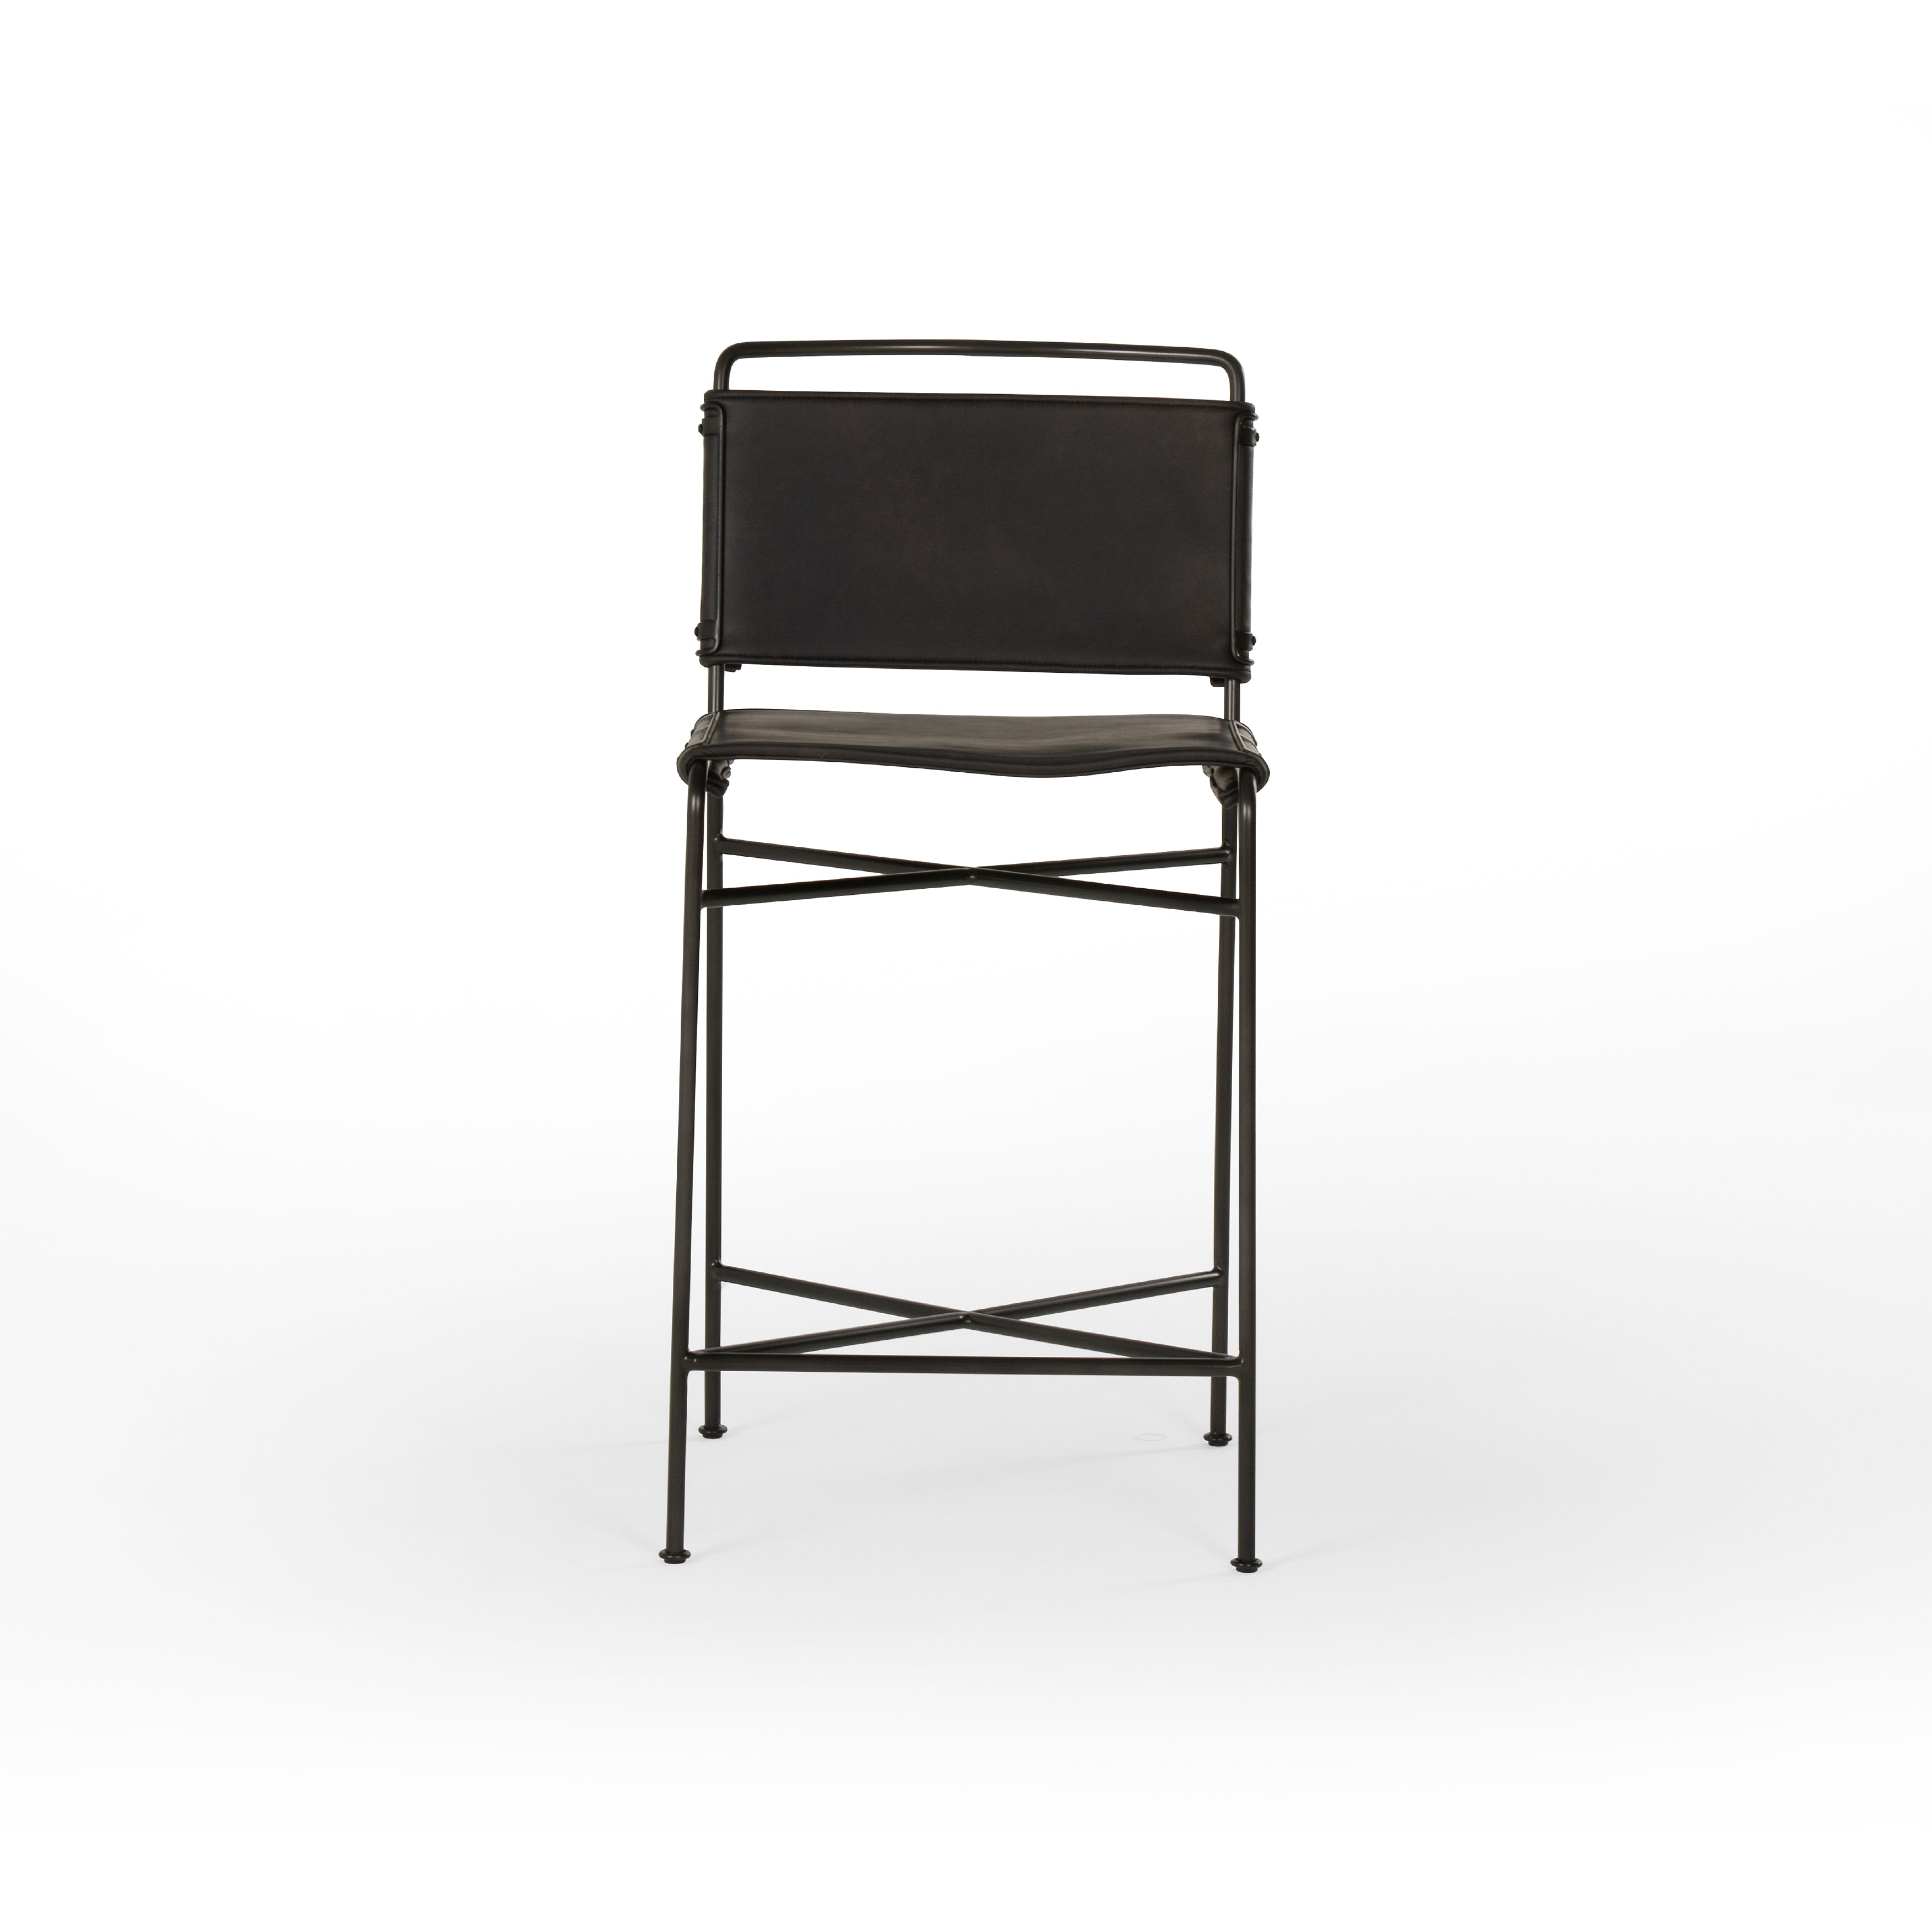 Slim lines and mixed materials combine for ultimate comfort. Architecturally inspired steel tubing is graced by simply contoured black faux leather seating.  Bar Stool: Size: 20.5" w x 24.25" d x 40" h Seat Depth: 15.25" Seat Height: 26.5"  Counter Stool: Overall Dimensions: 20.50"w x 24.25"d x 40.00"h Seat Depth: 15.25" Seat Height: 26.50"